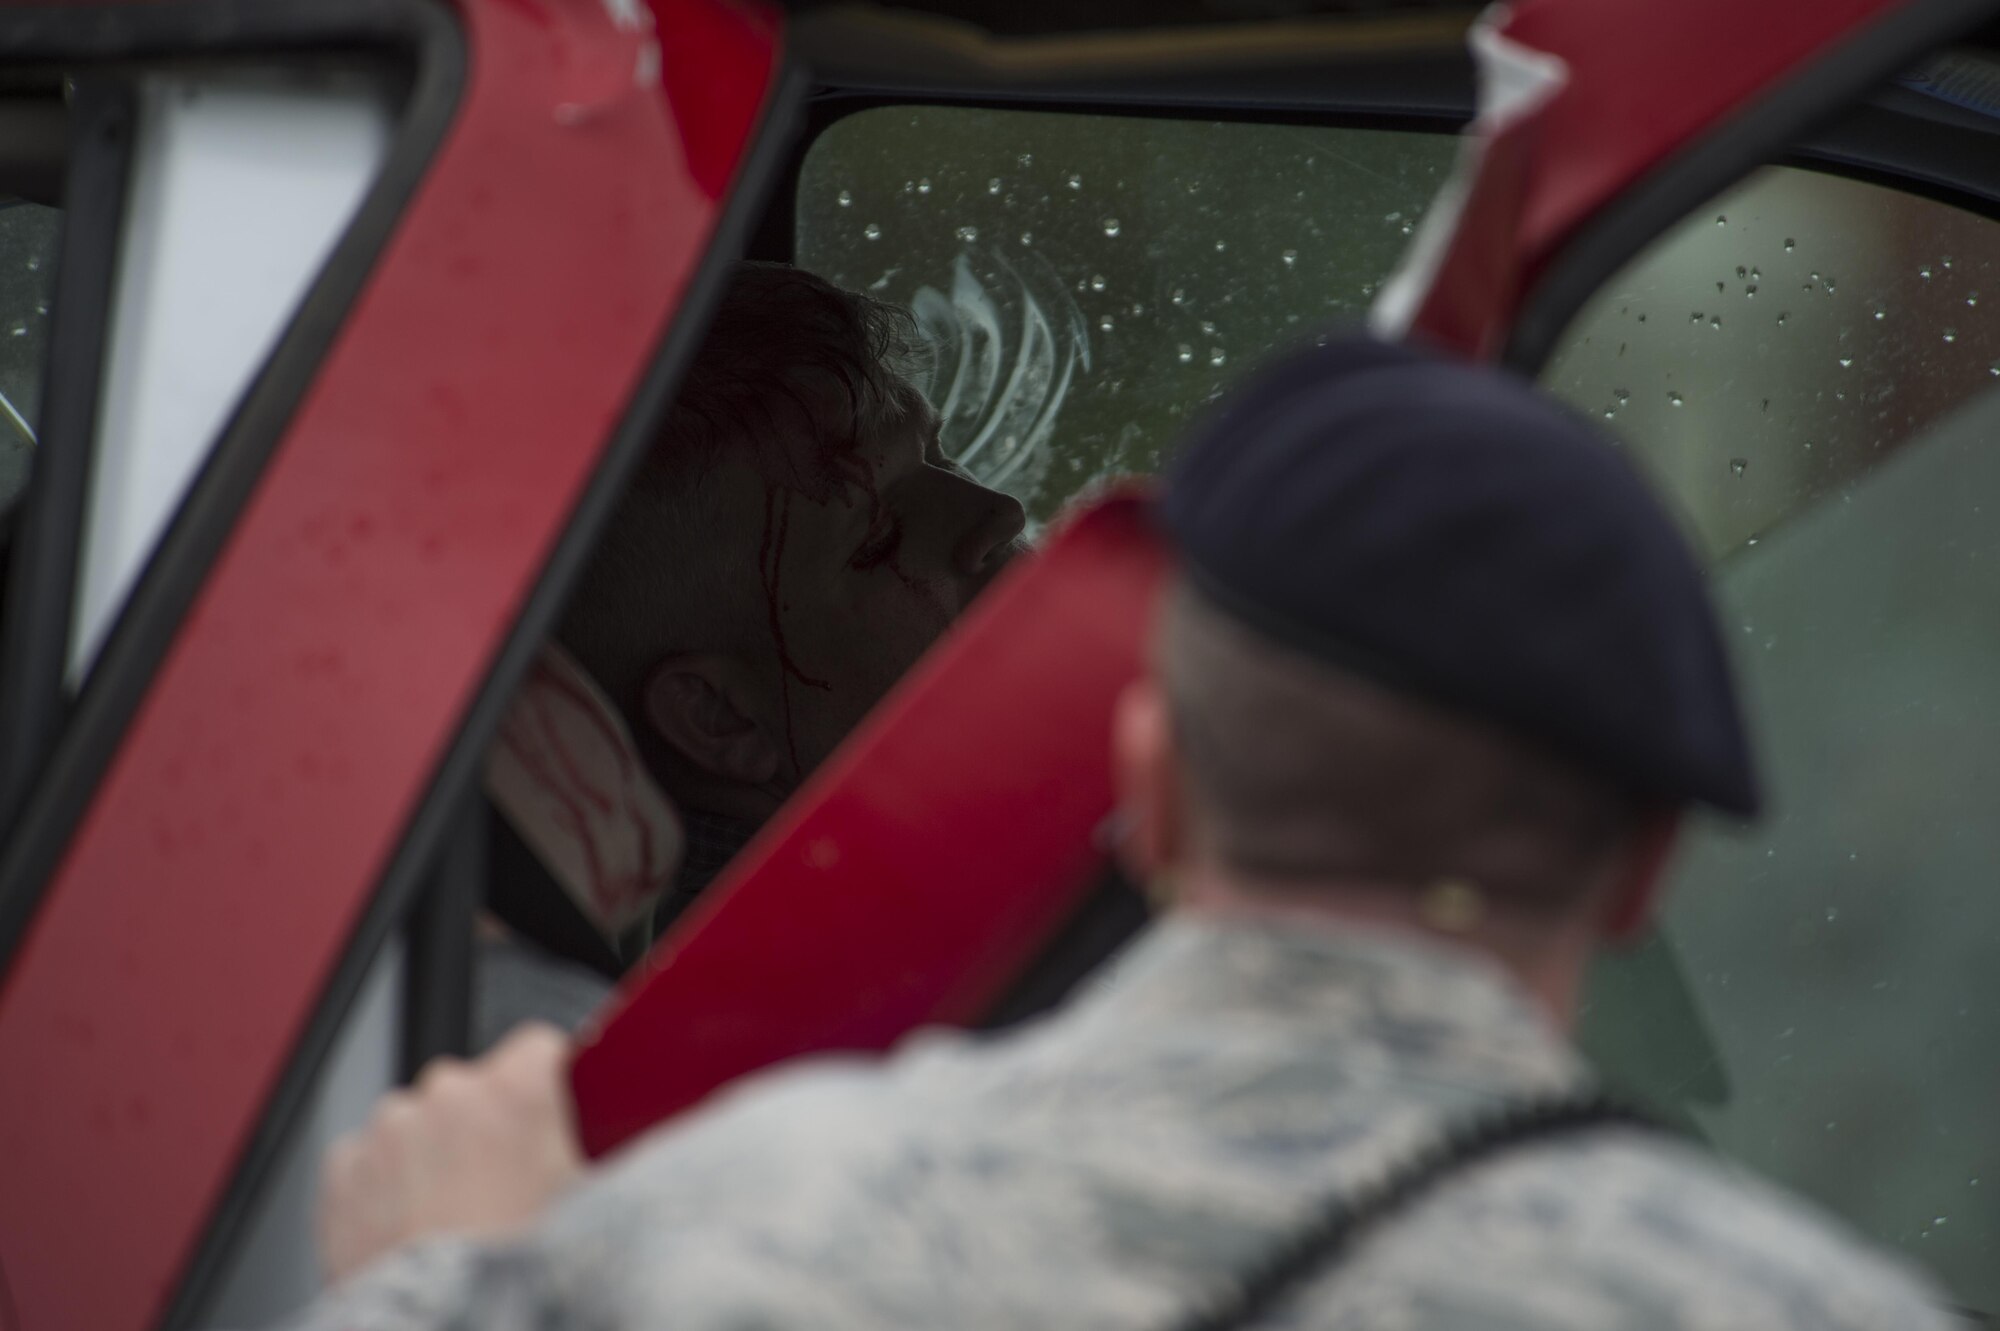 Staff Sgt. James Hebert, a 90th Security Forces Squadron member, arrives at a crashed vehicle to assess the condition of Master Sgt. Josh Wilson, 90th Civil Engineering Squadron assistant fire chief, during a drinking and driving awareness event at F.E. Warren Air Force Base, Wyo., June 30, 2016. In the state of Wyoming, it is illegal to drive with a blood alcohol concentration of .08 or above. More than 200 Airman from the 90th Missile Wing attended the event to witness firsthand the devastating effects of a DUI. (U.S. Air Force photo by Staff Sgt. Christopher Ruano)